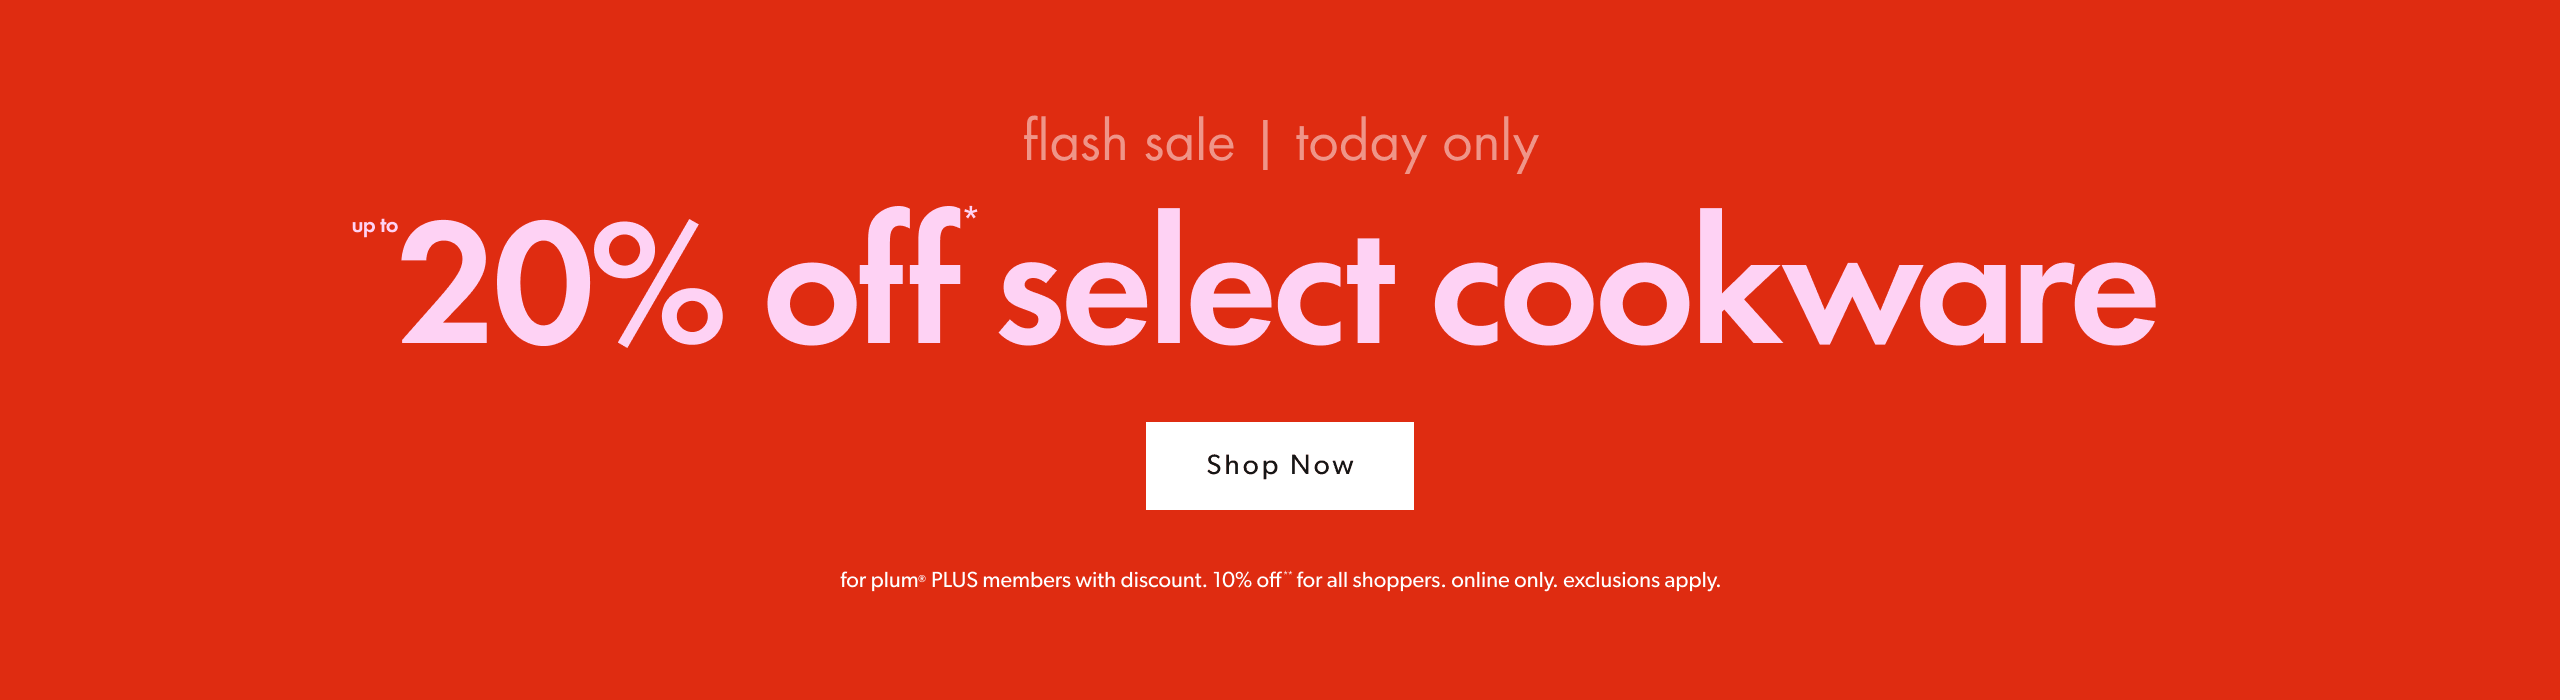 Up to 20% off Select Cookware Flash Sale